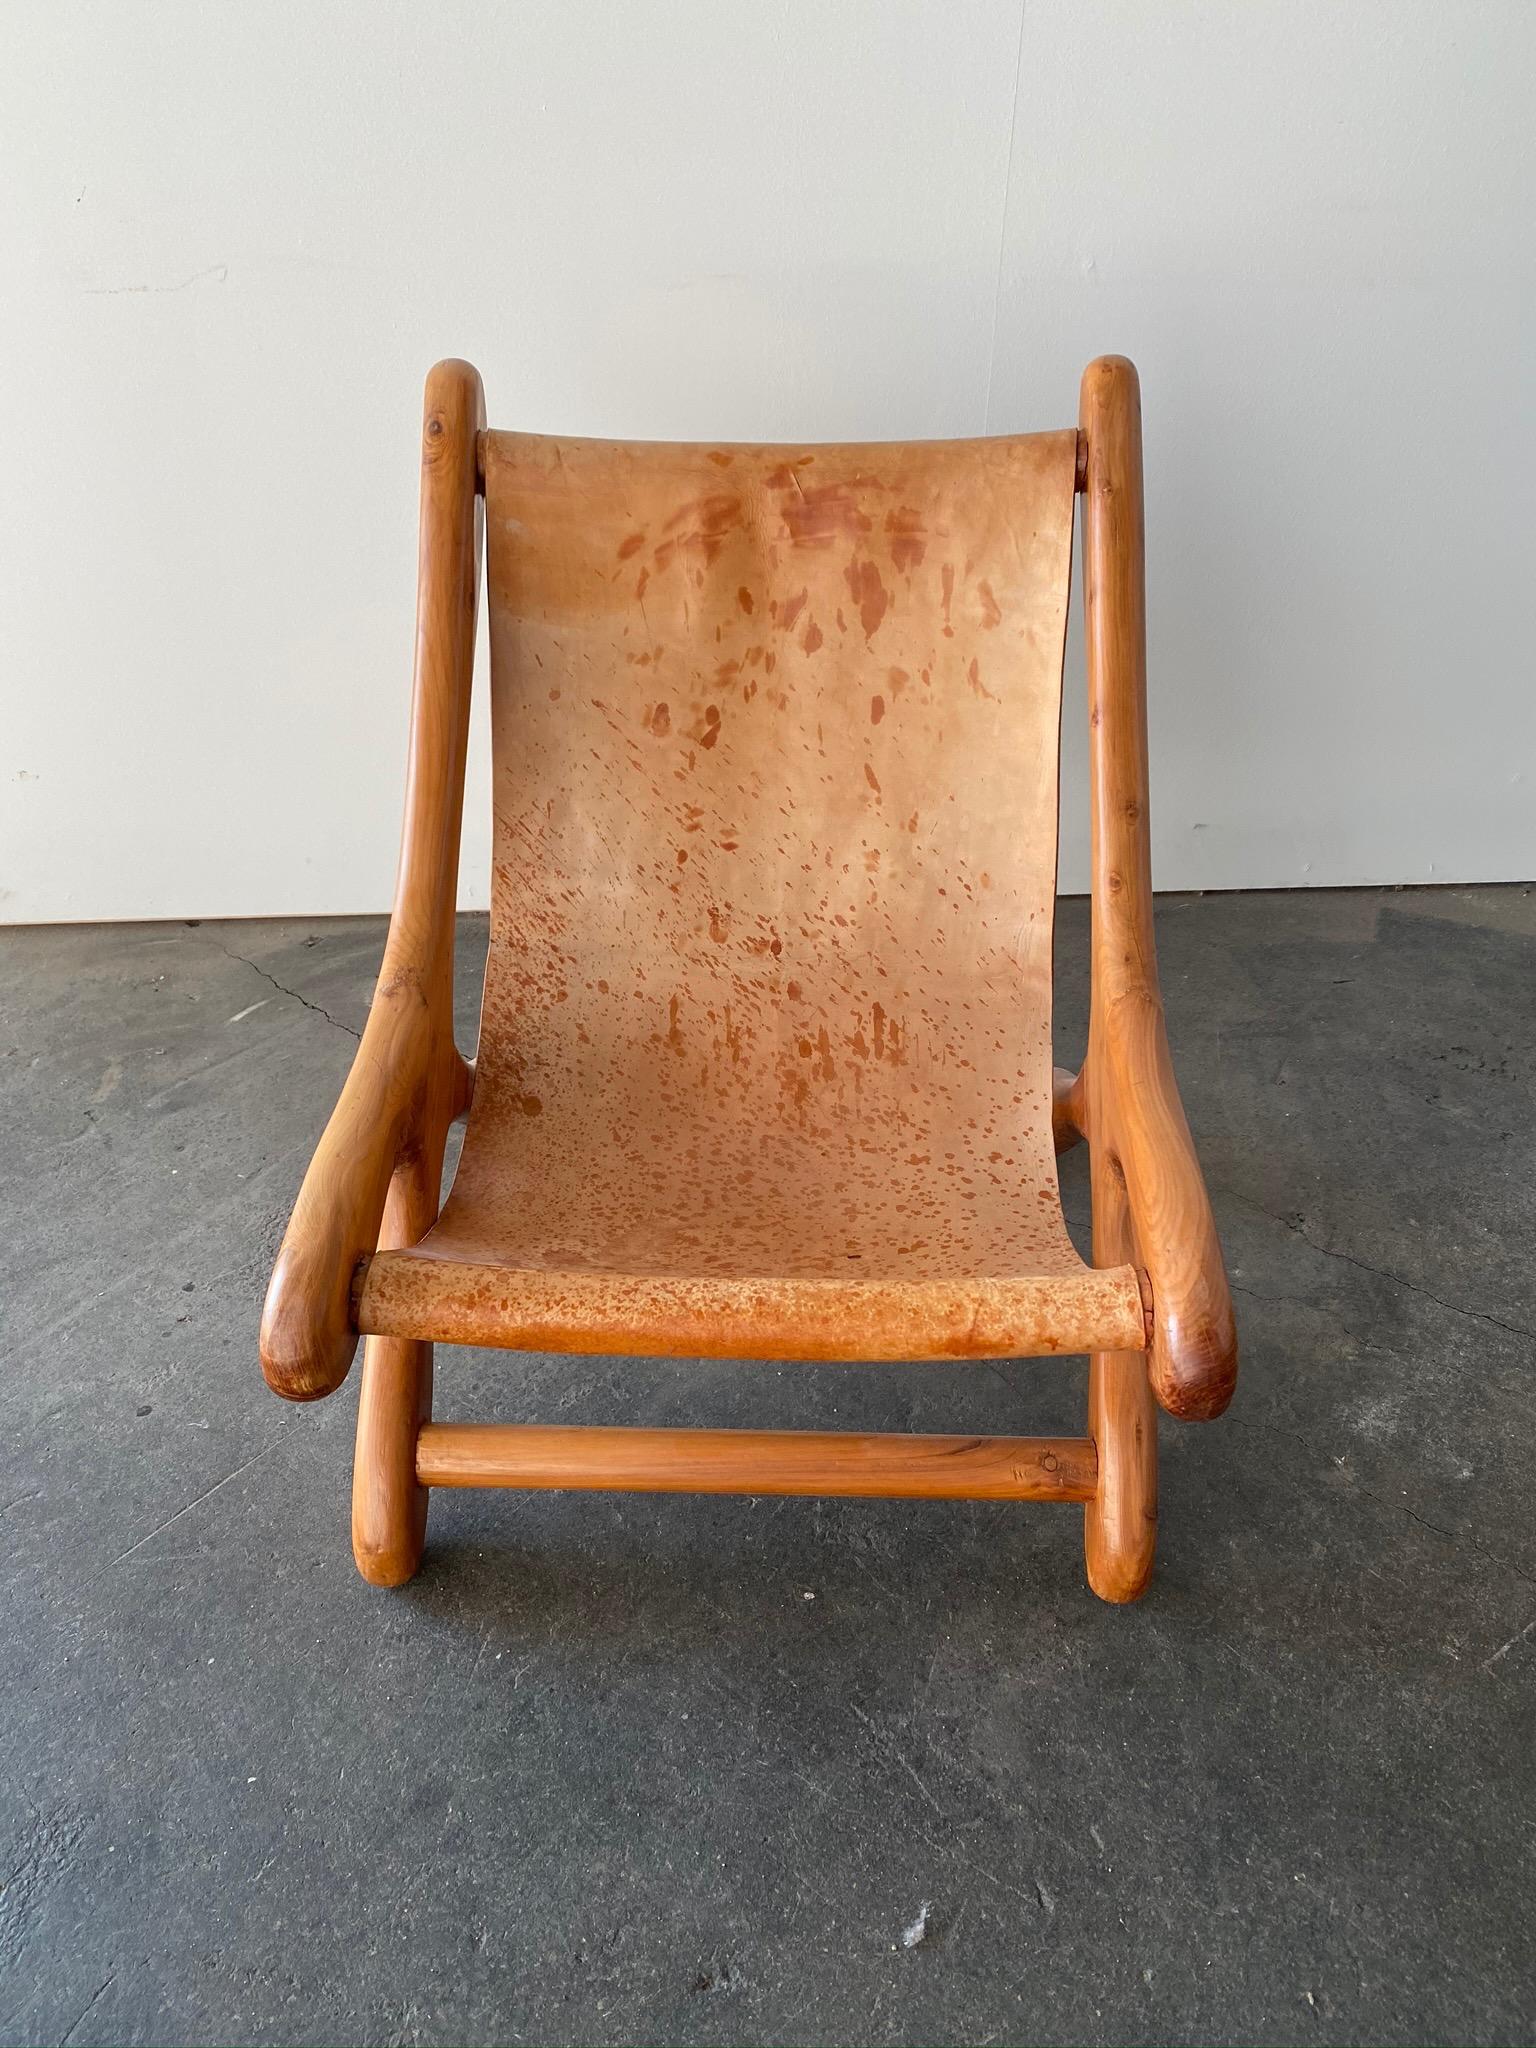 Sling chair in the style of Don Shoemaker, Mexican design of the 1960s. Organic shape. Unusual cedar lounge chair with leather sling.
Mexican modern is a style that fits incredibly well with Mid-Century Modern, Scandinavian or Danish modern,